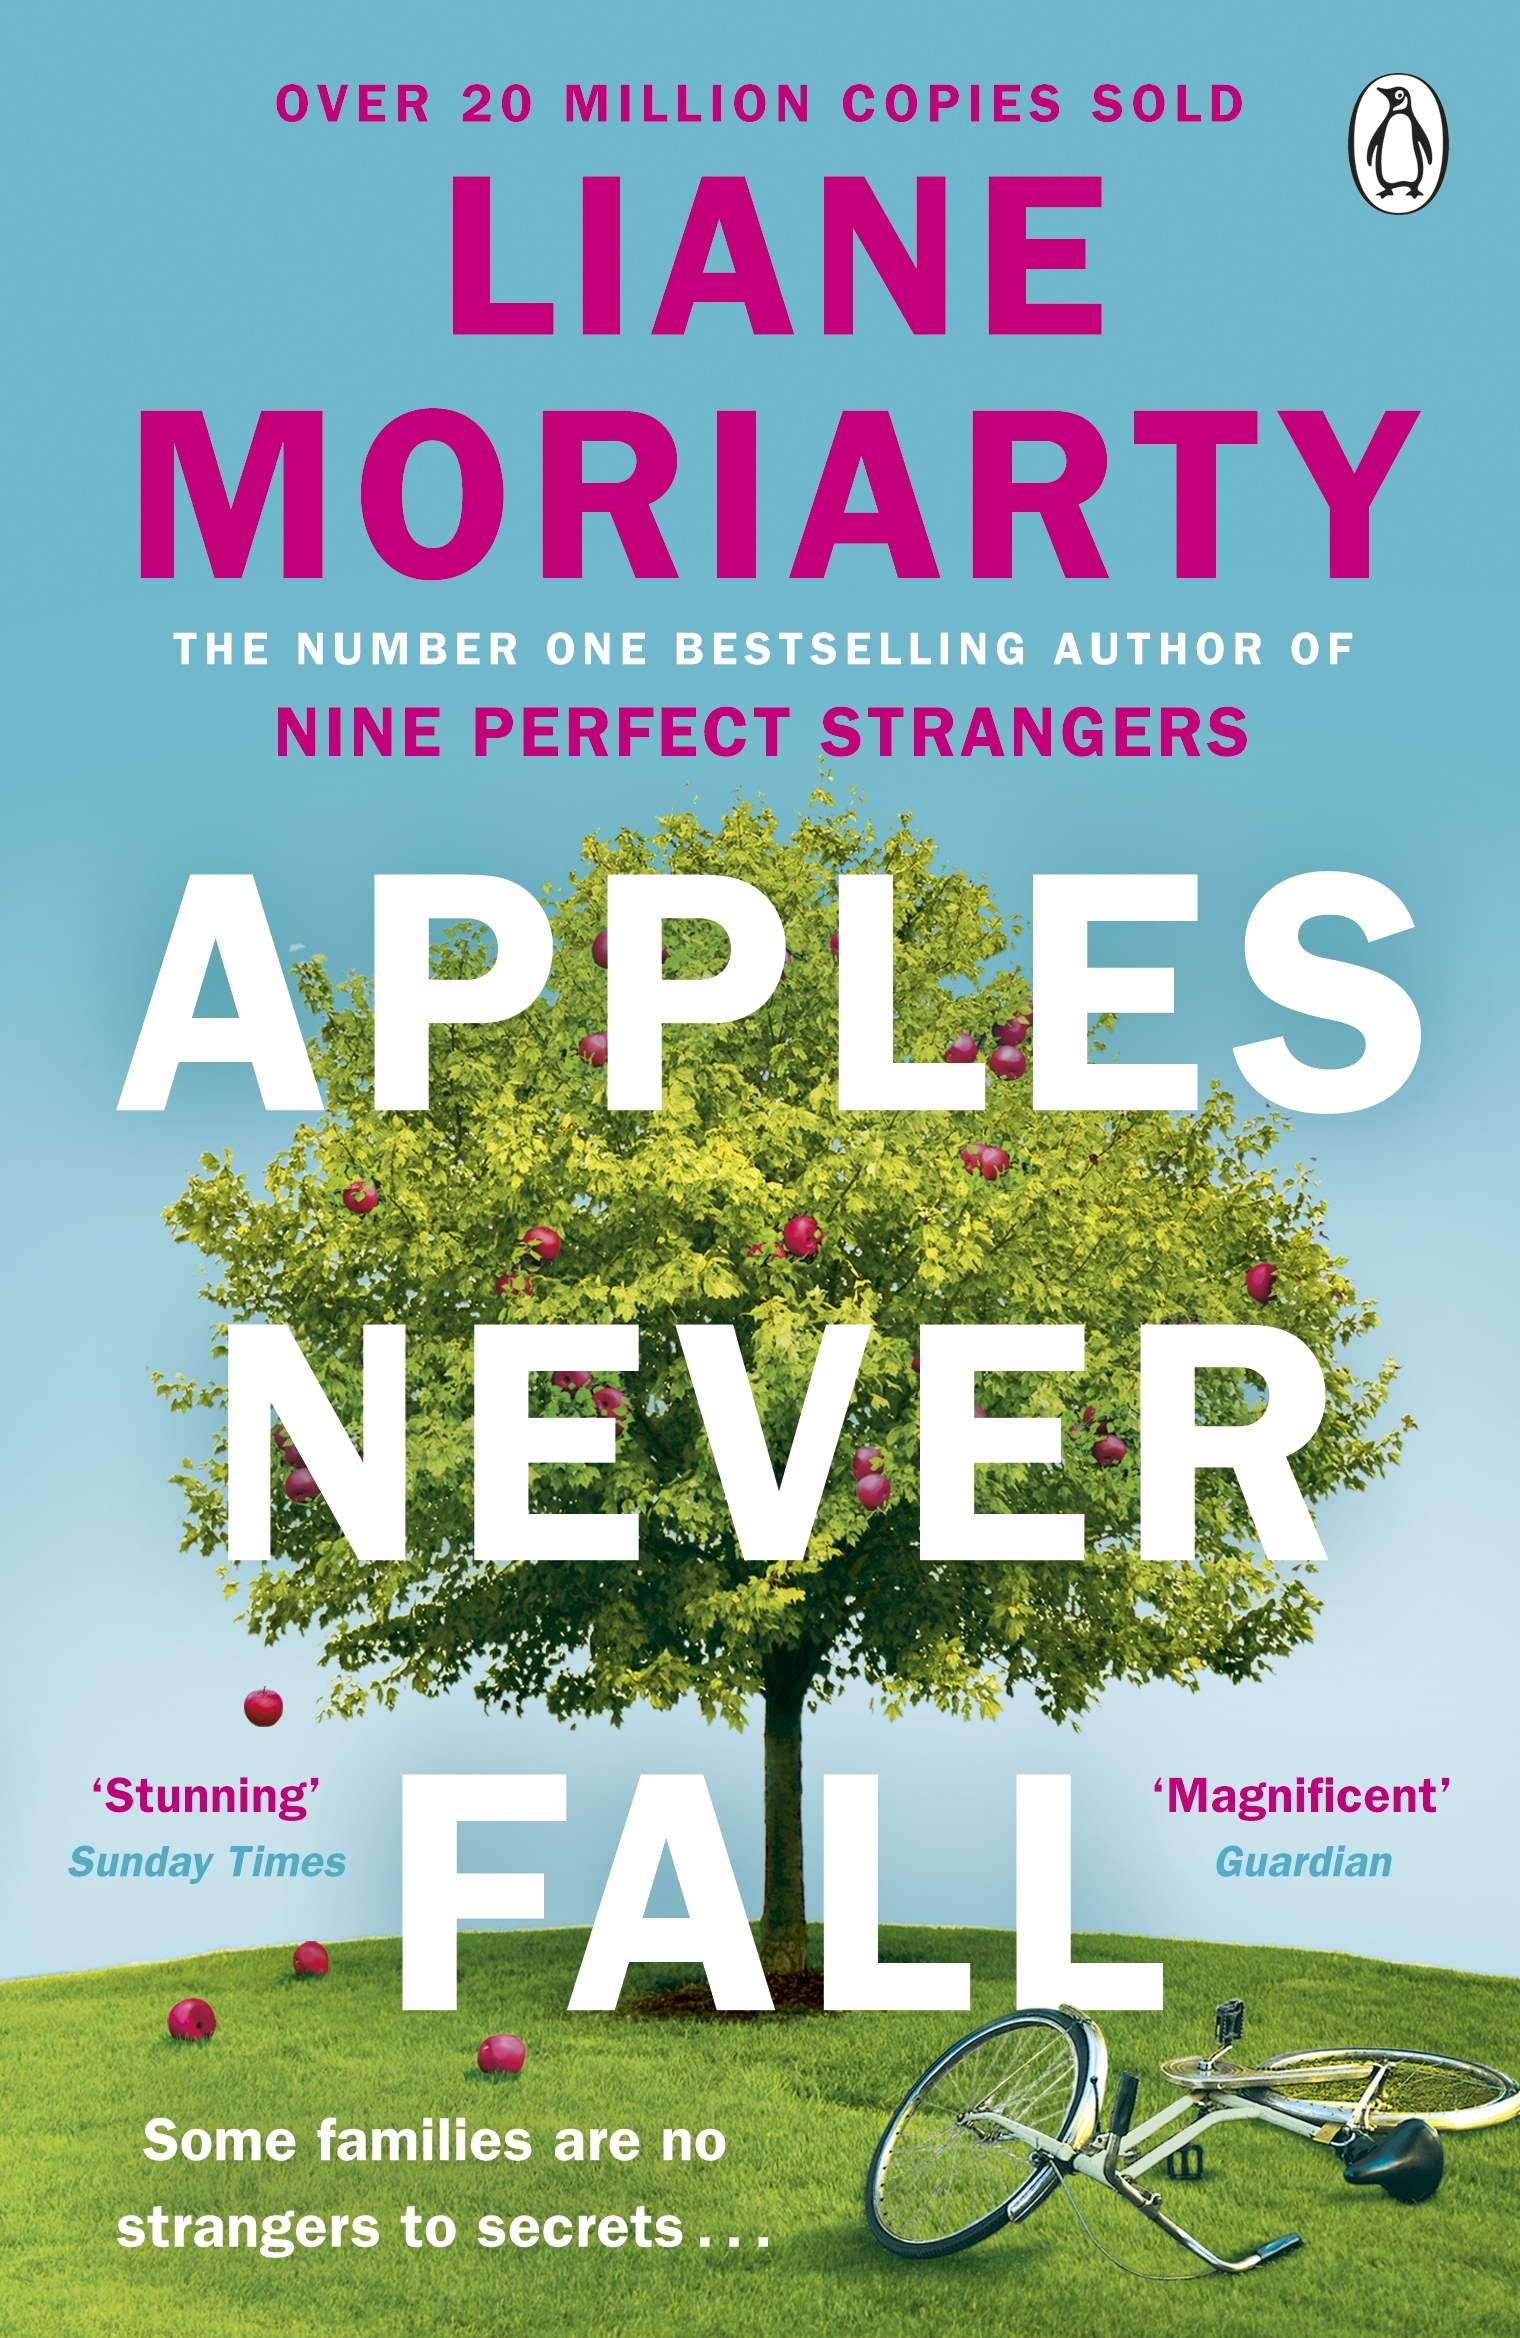 book review of apples never fall